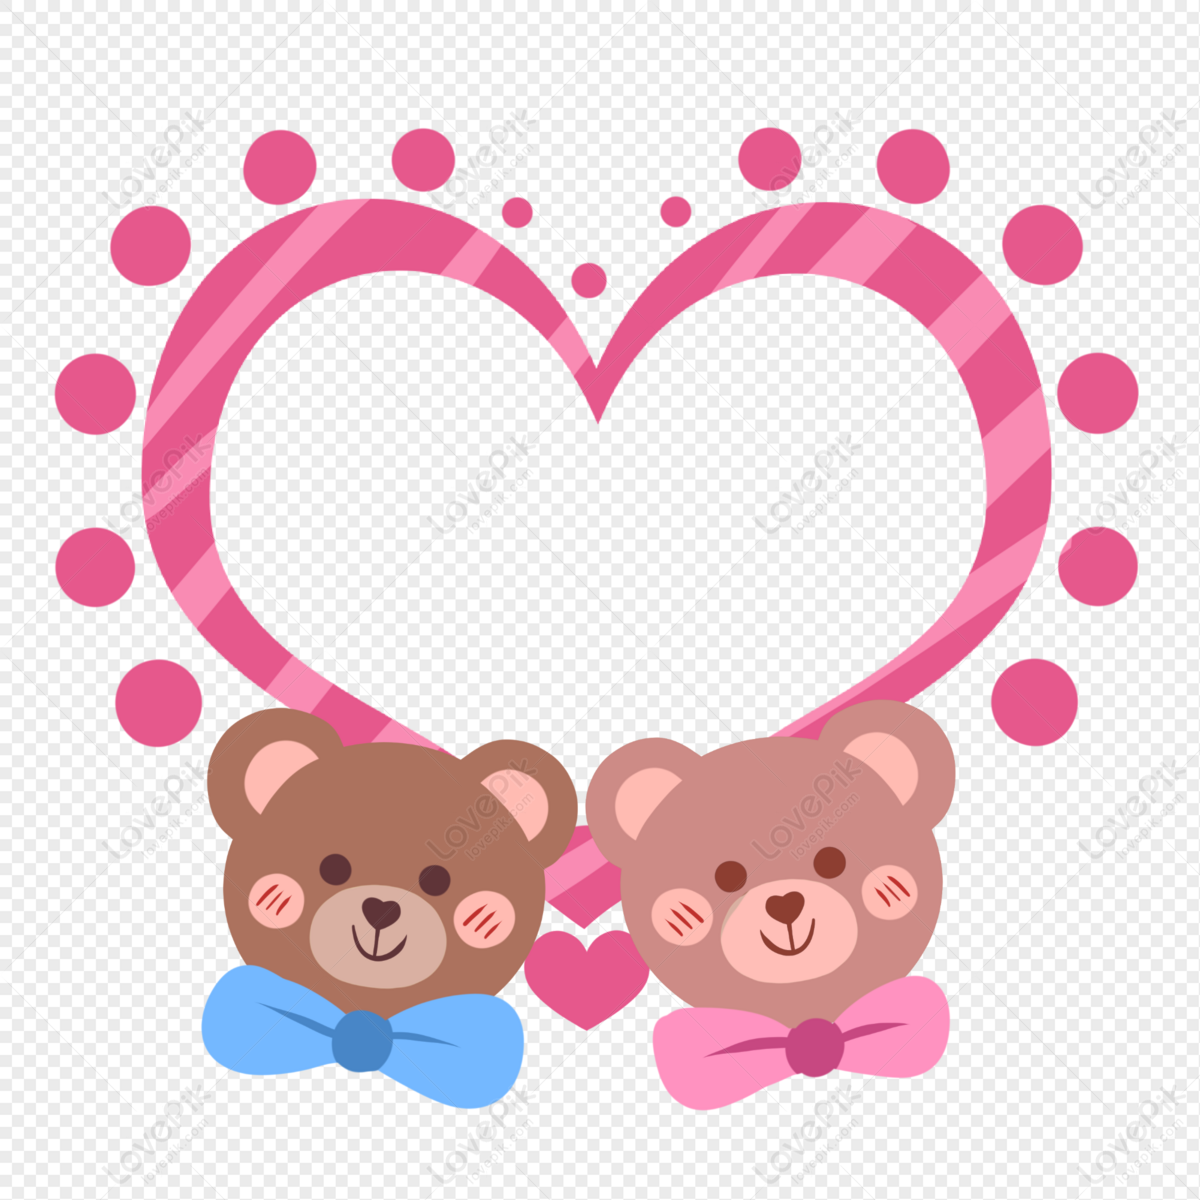 Two Bears Loving Border PNG Picture And Clipart Image For Free ...